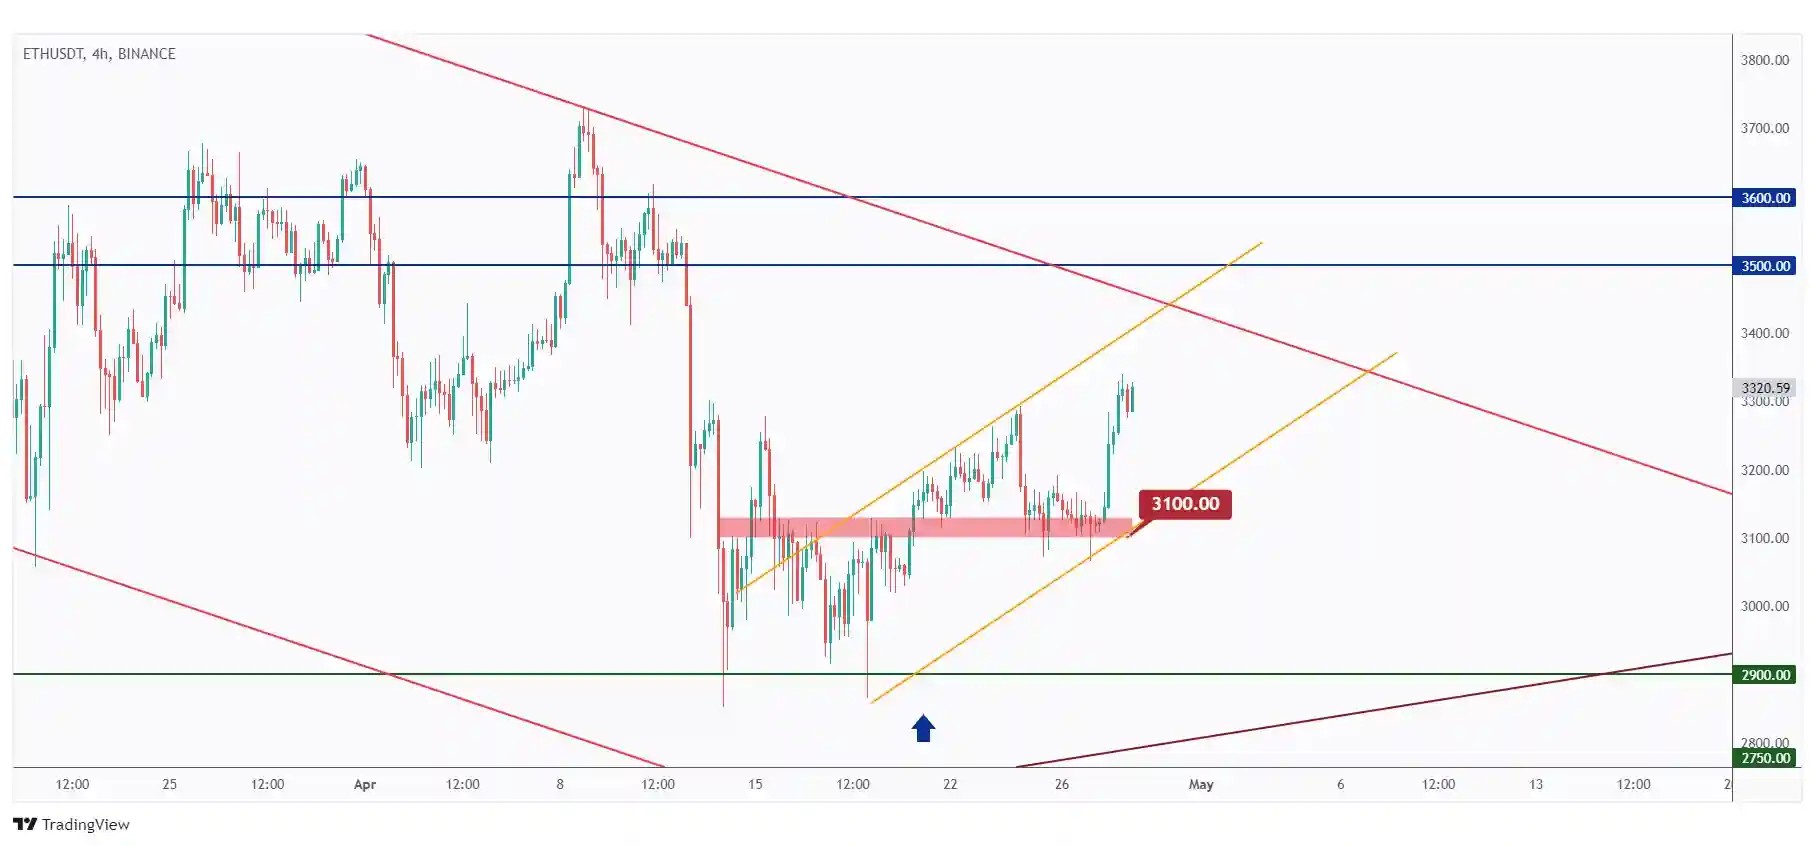 ETH 4h chat overall bullish medium-term trading within a rising channel as long as the last low at $3100 holds.